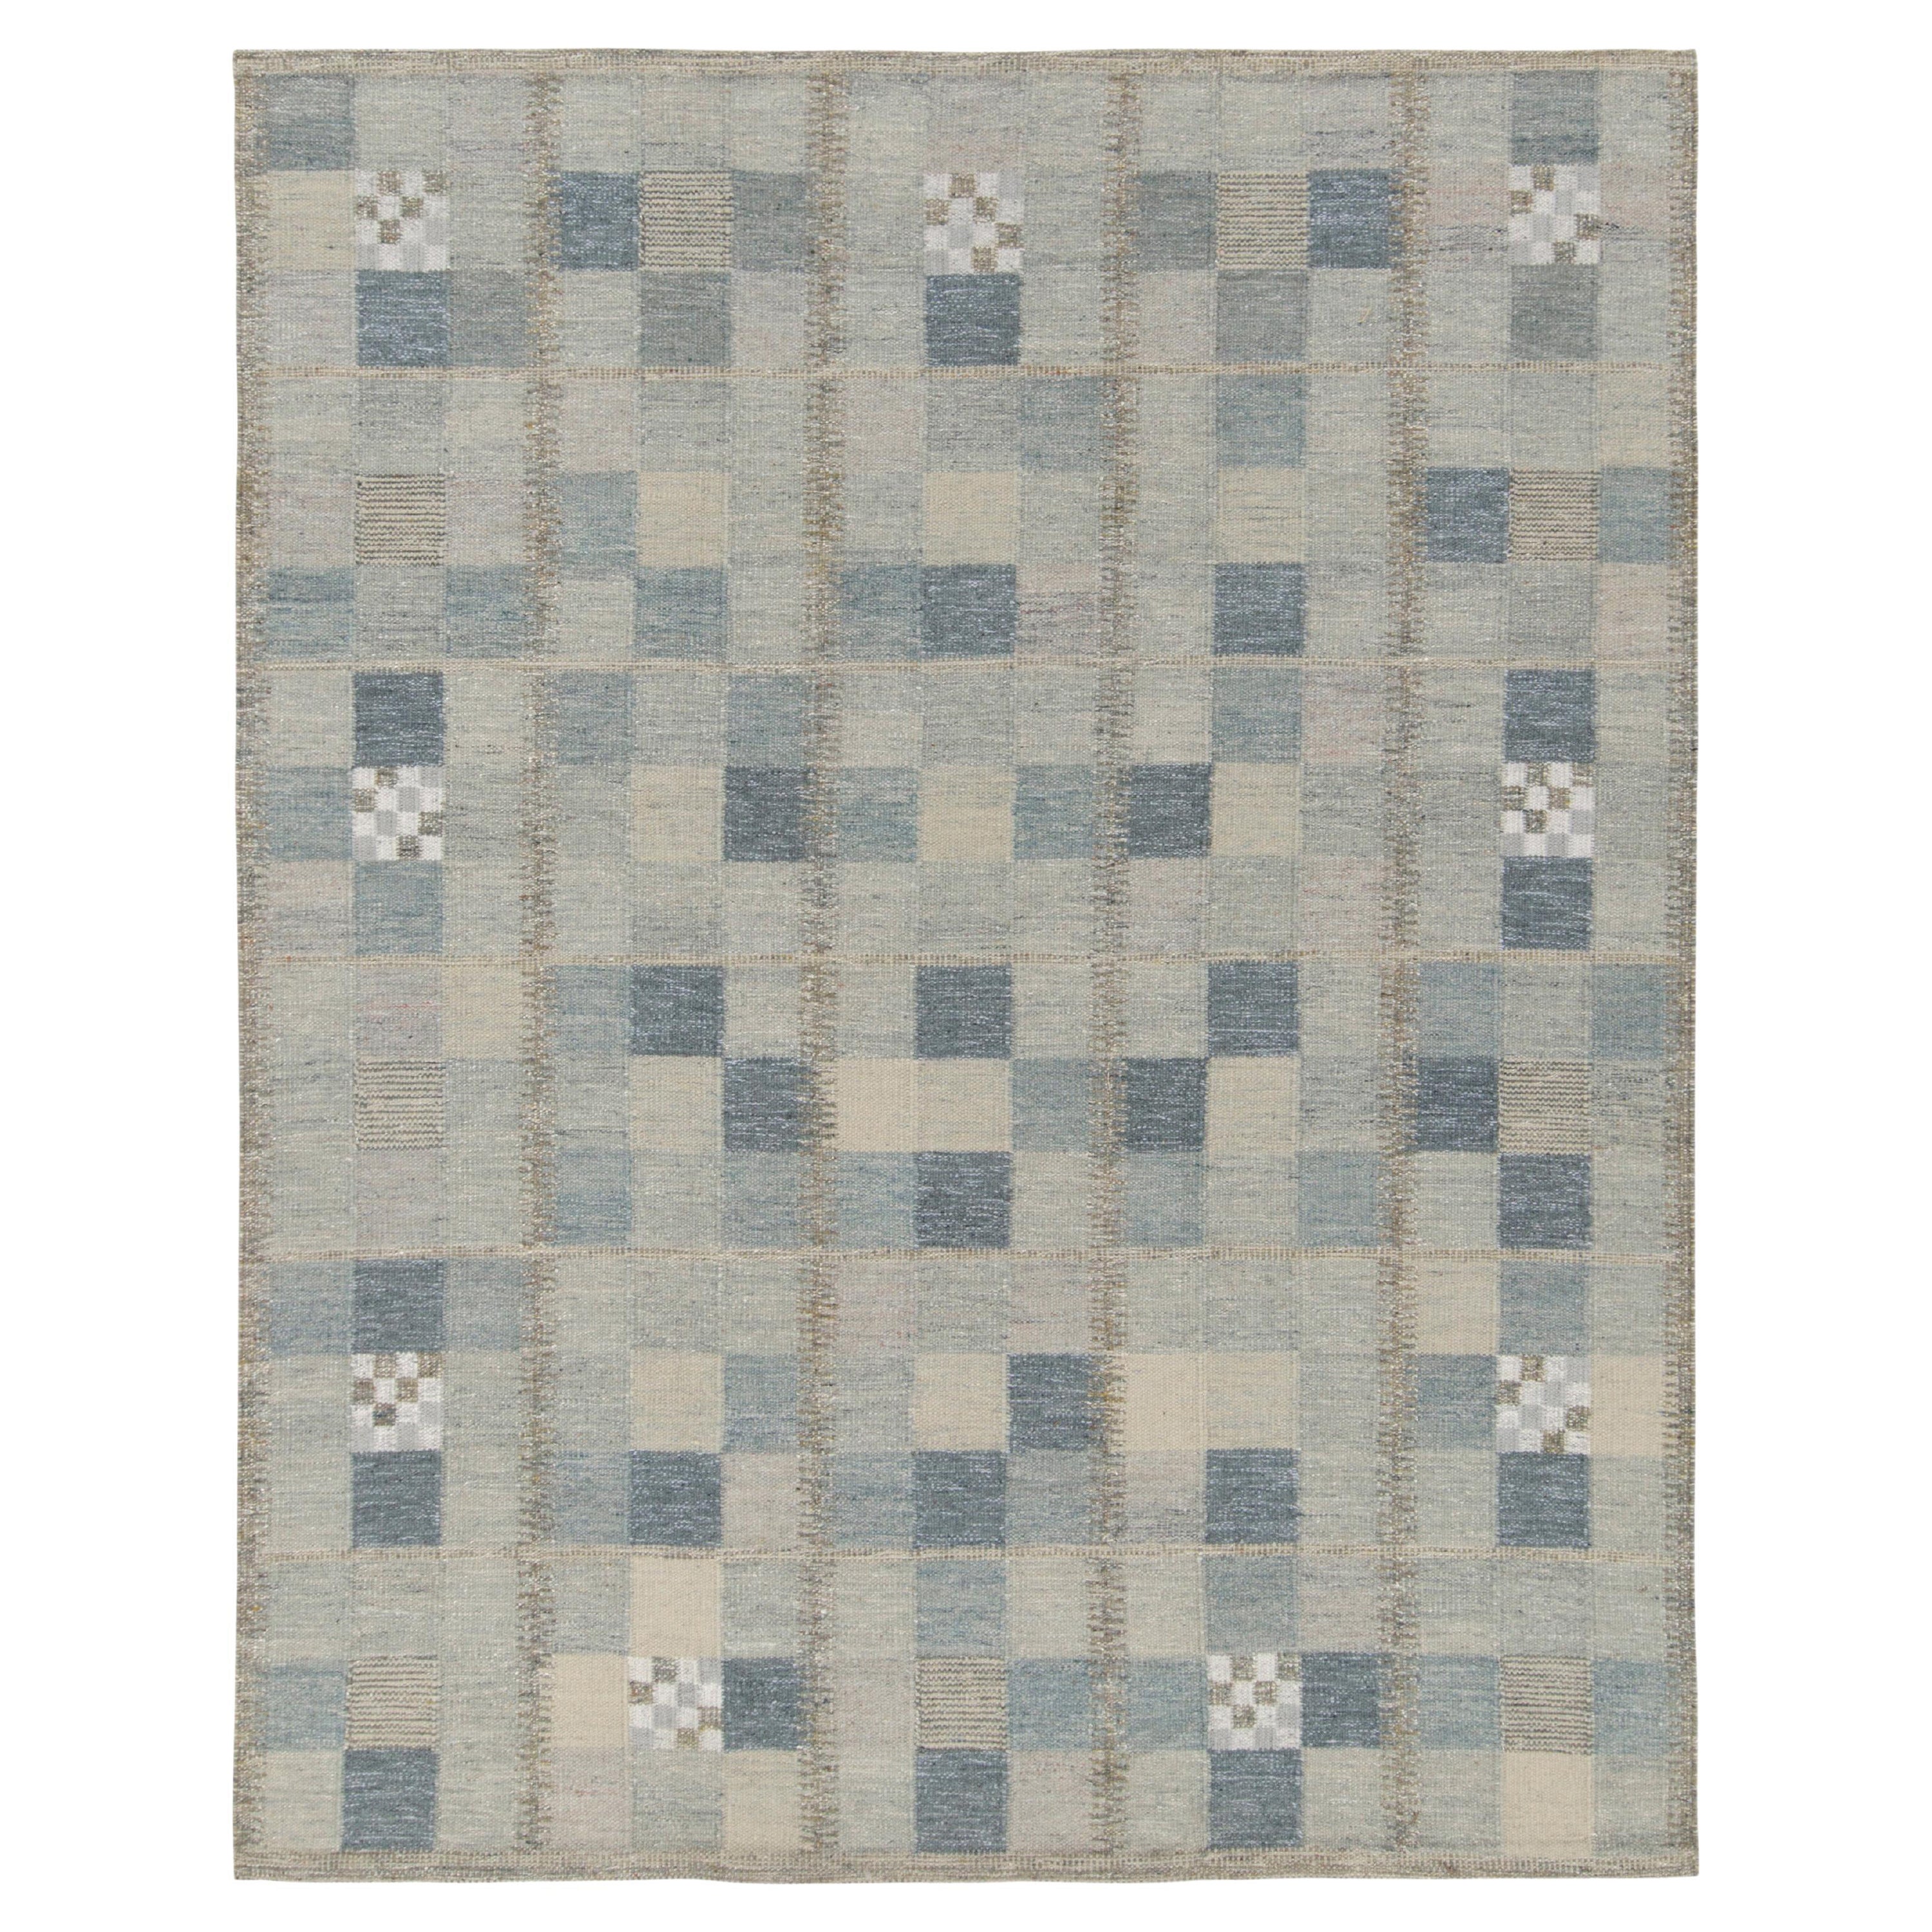 Rug and Kilim’s Scandinavian Style Kilim in Blue, Grey and Black ...